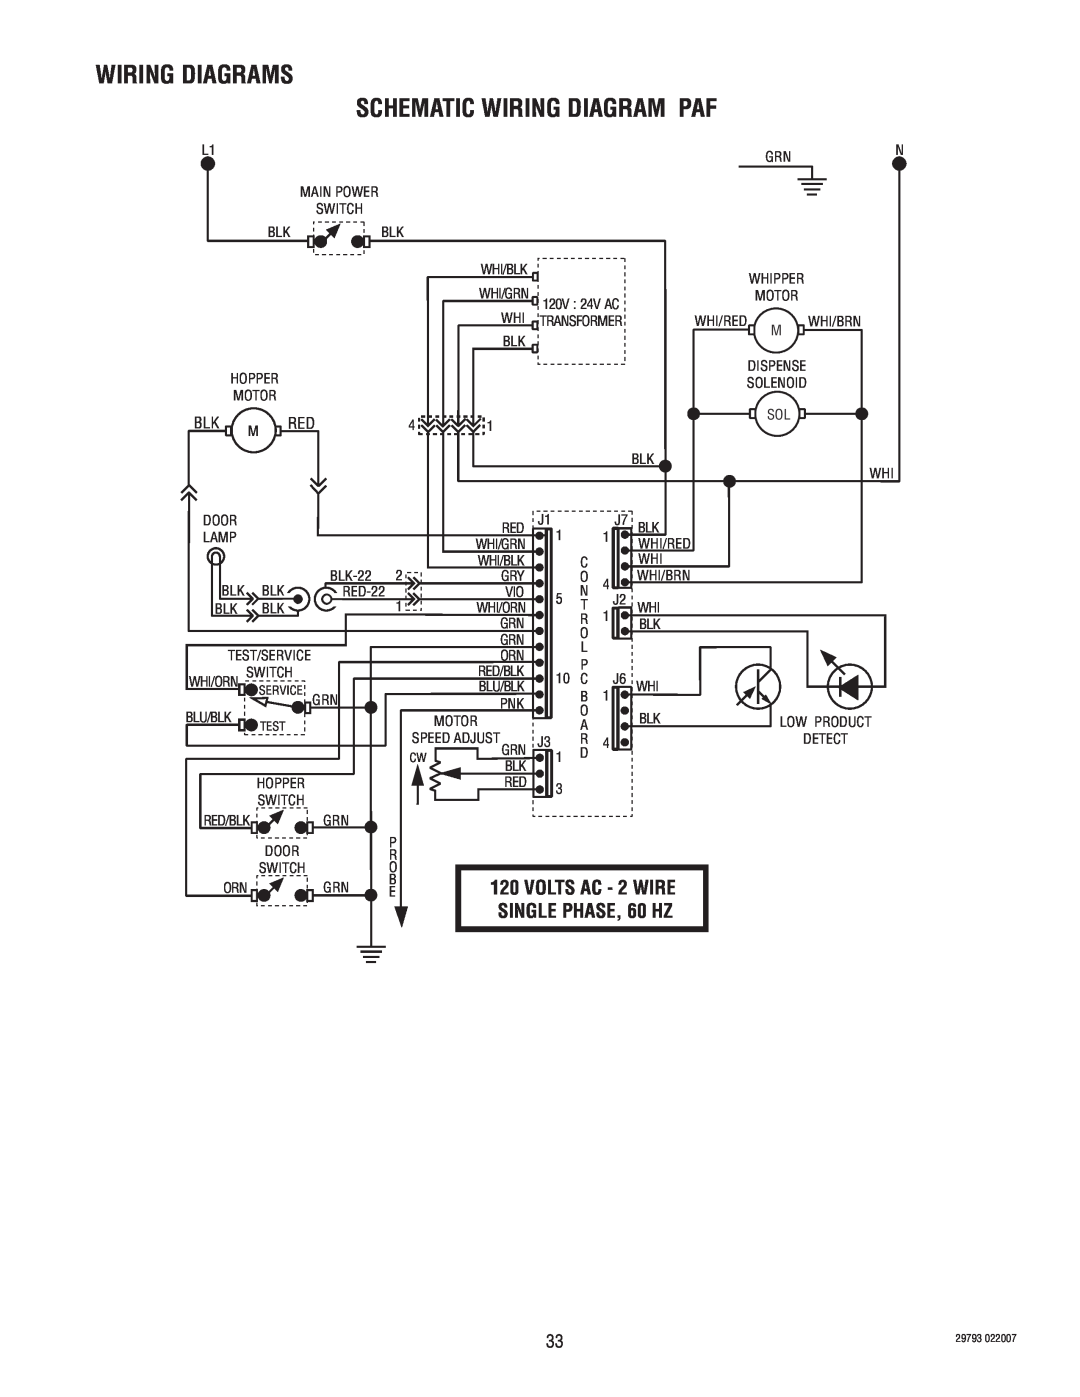 Bunn CDS-3 manual Wiring Diagrams Schematic Wiring Diagram Paf, SINGLE PHASE, 60 HZ, VOLTS AC - 2 WIRE 